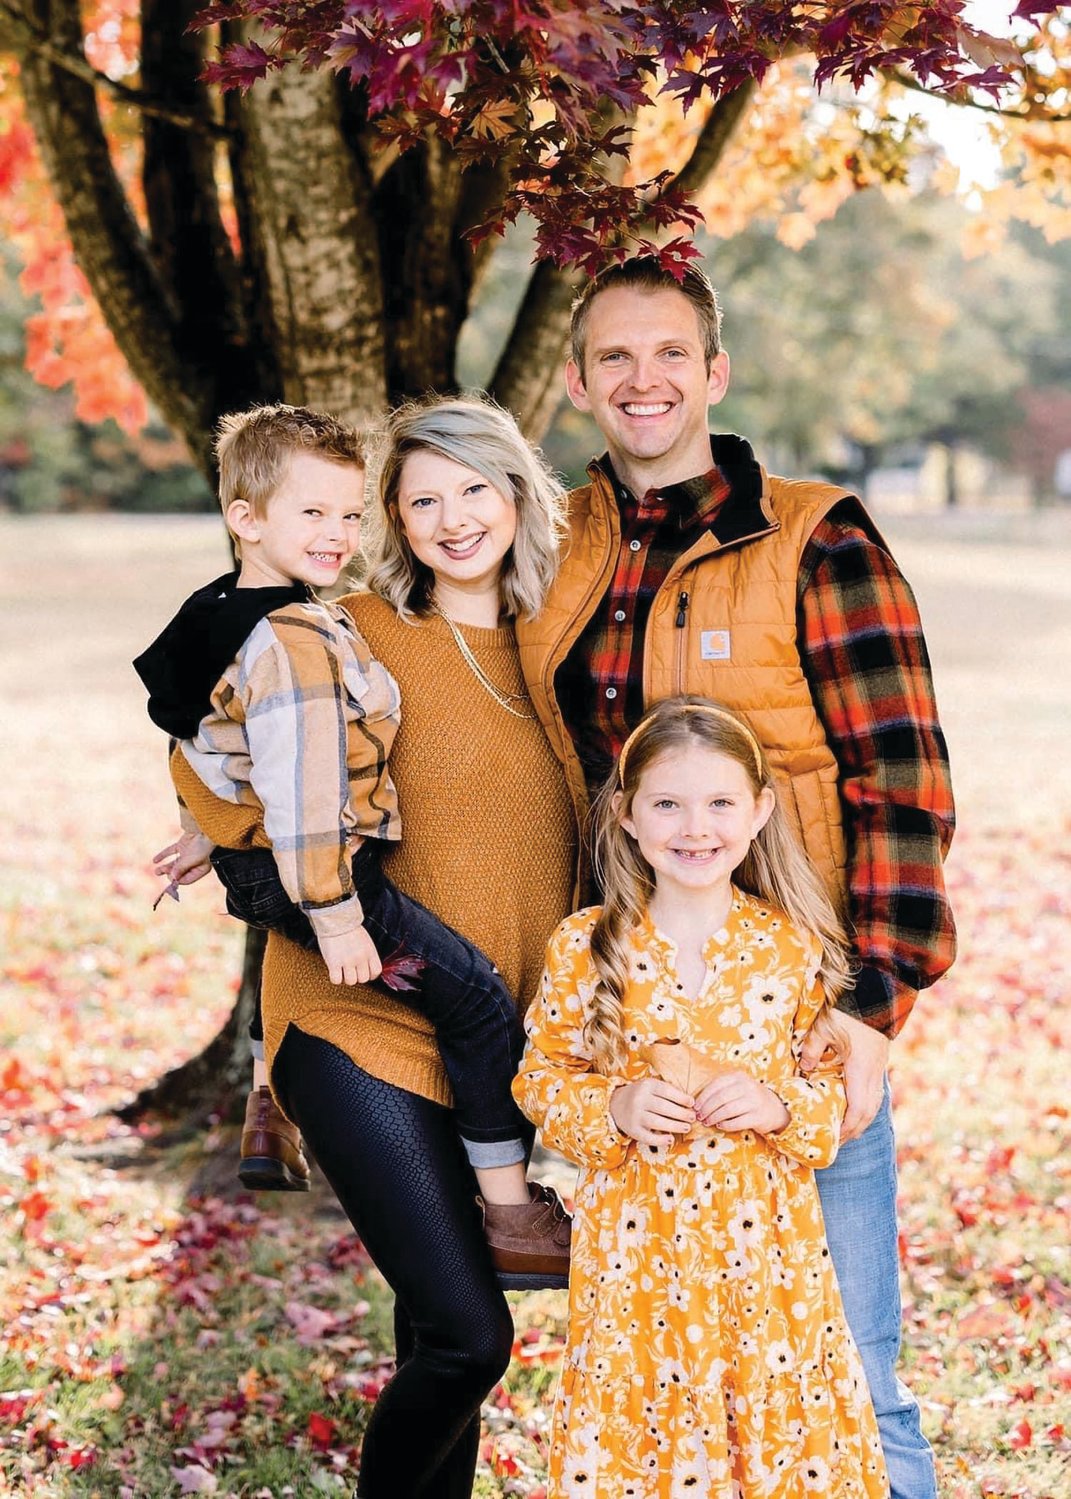 Dr. Clint Hall and his family.